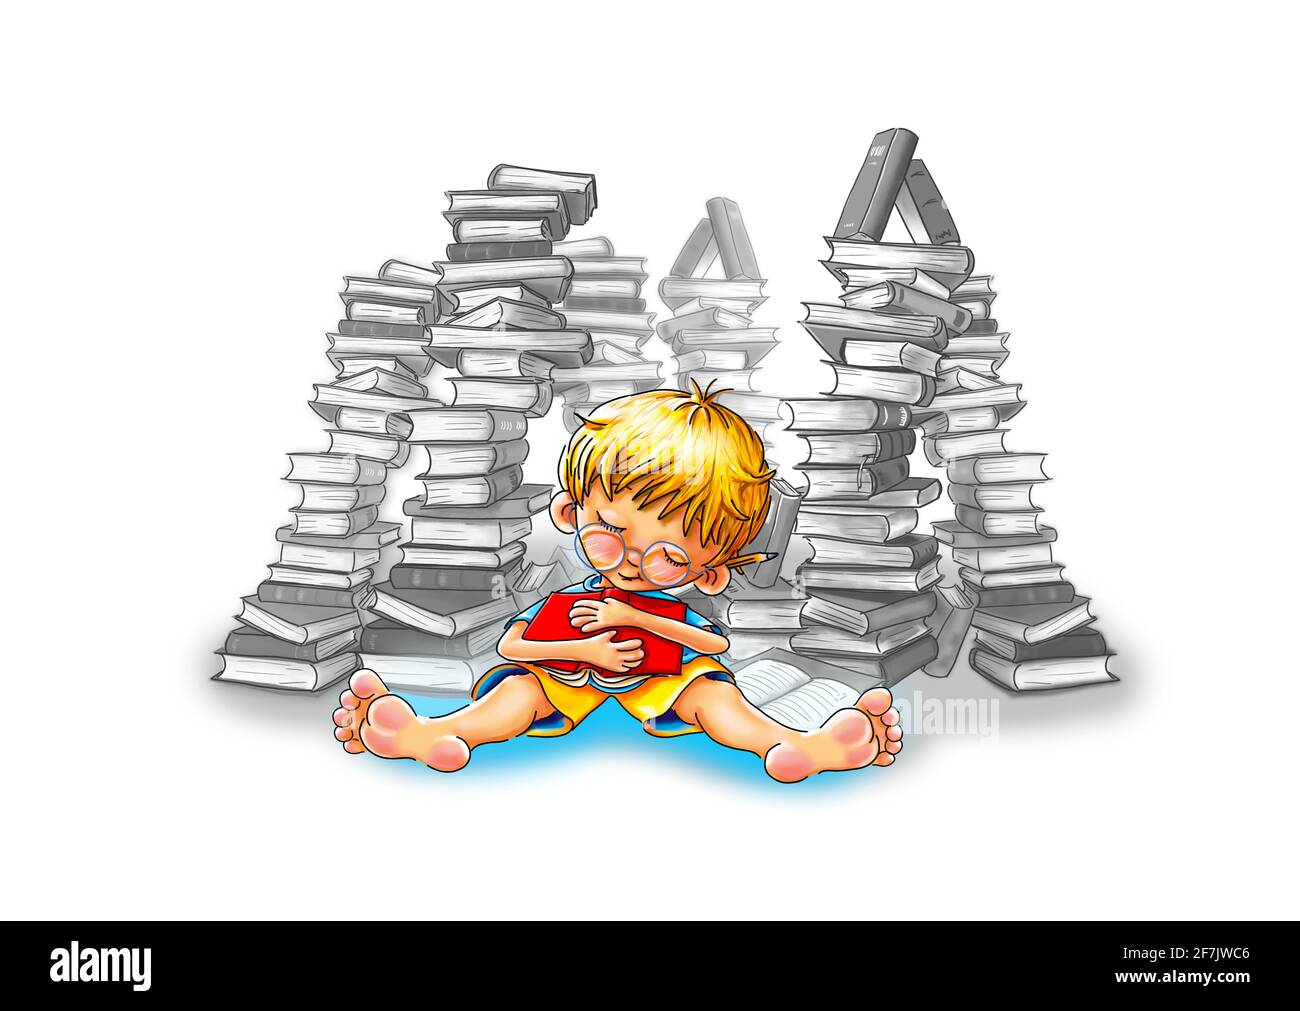 Little boy with glasses sits barefoot, legs stretched out, with a book he is hugging, asleep in front of stacks of books. He's clutching his book Stock Photo